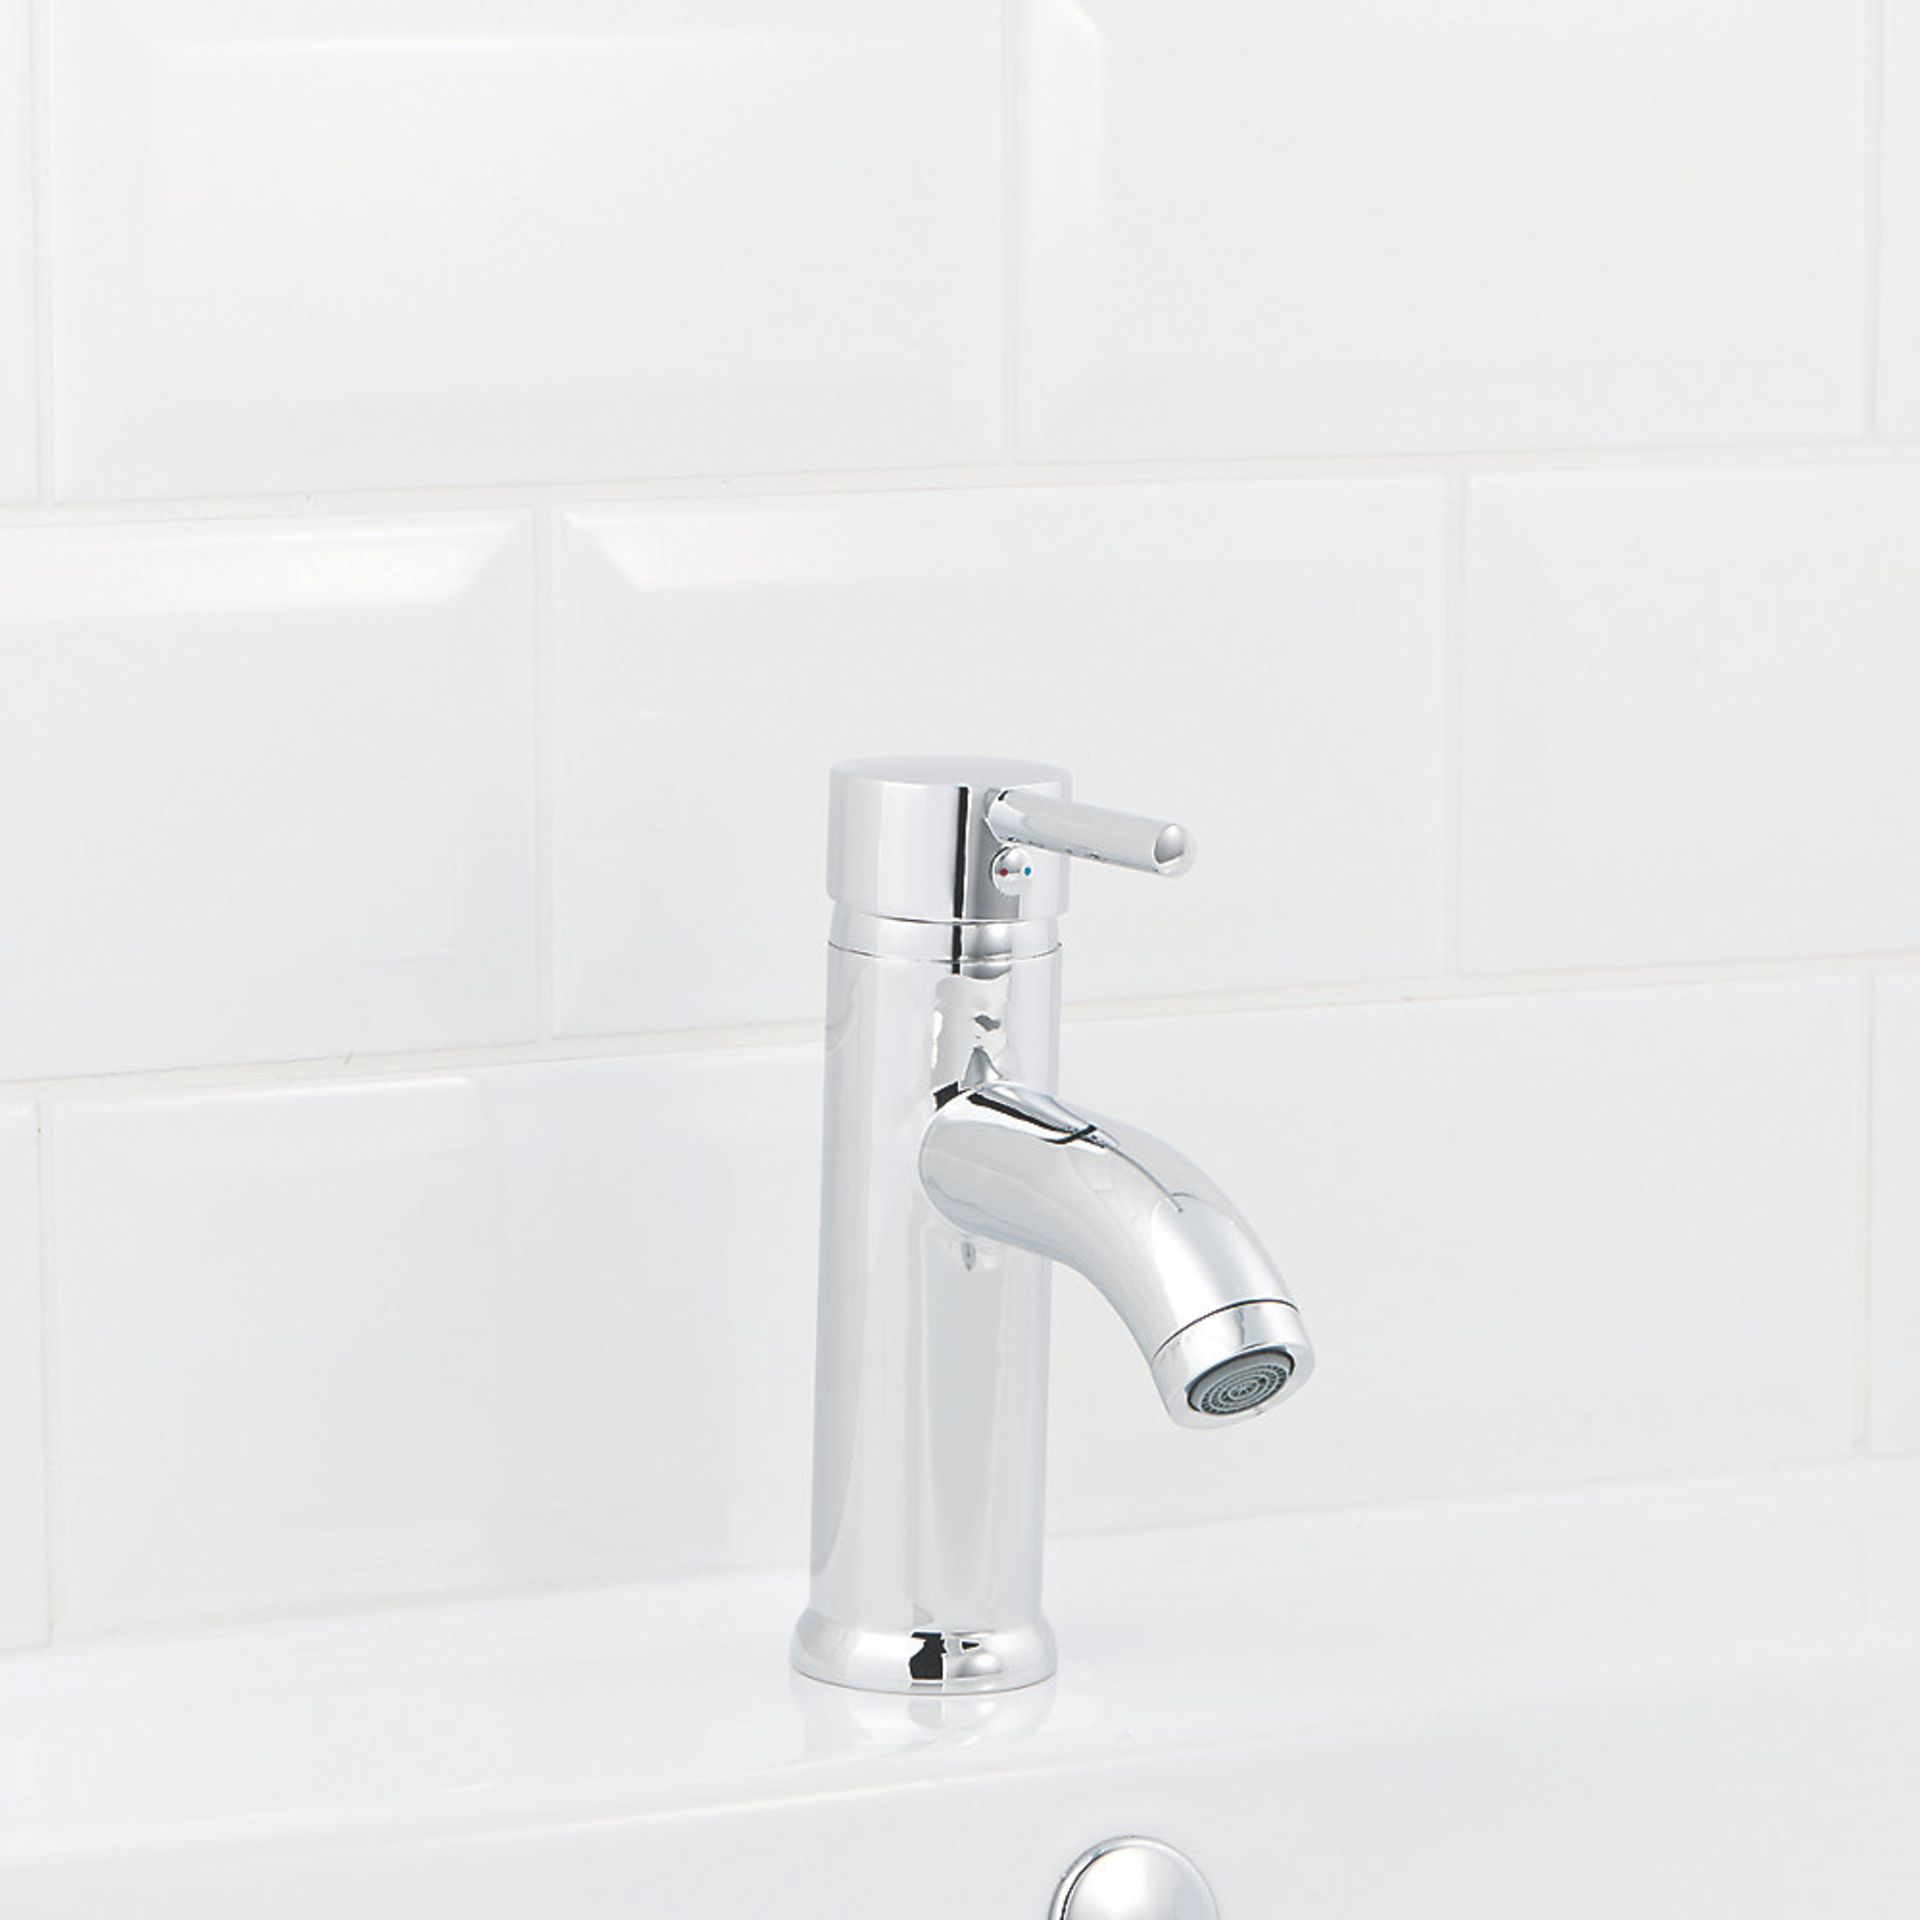 (JG123) NEW & BOXED HOFFELL SINGLE LEVER BASIN MONO MIXER TAP. Chrome-plated brass. Easy to cle...